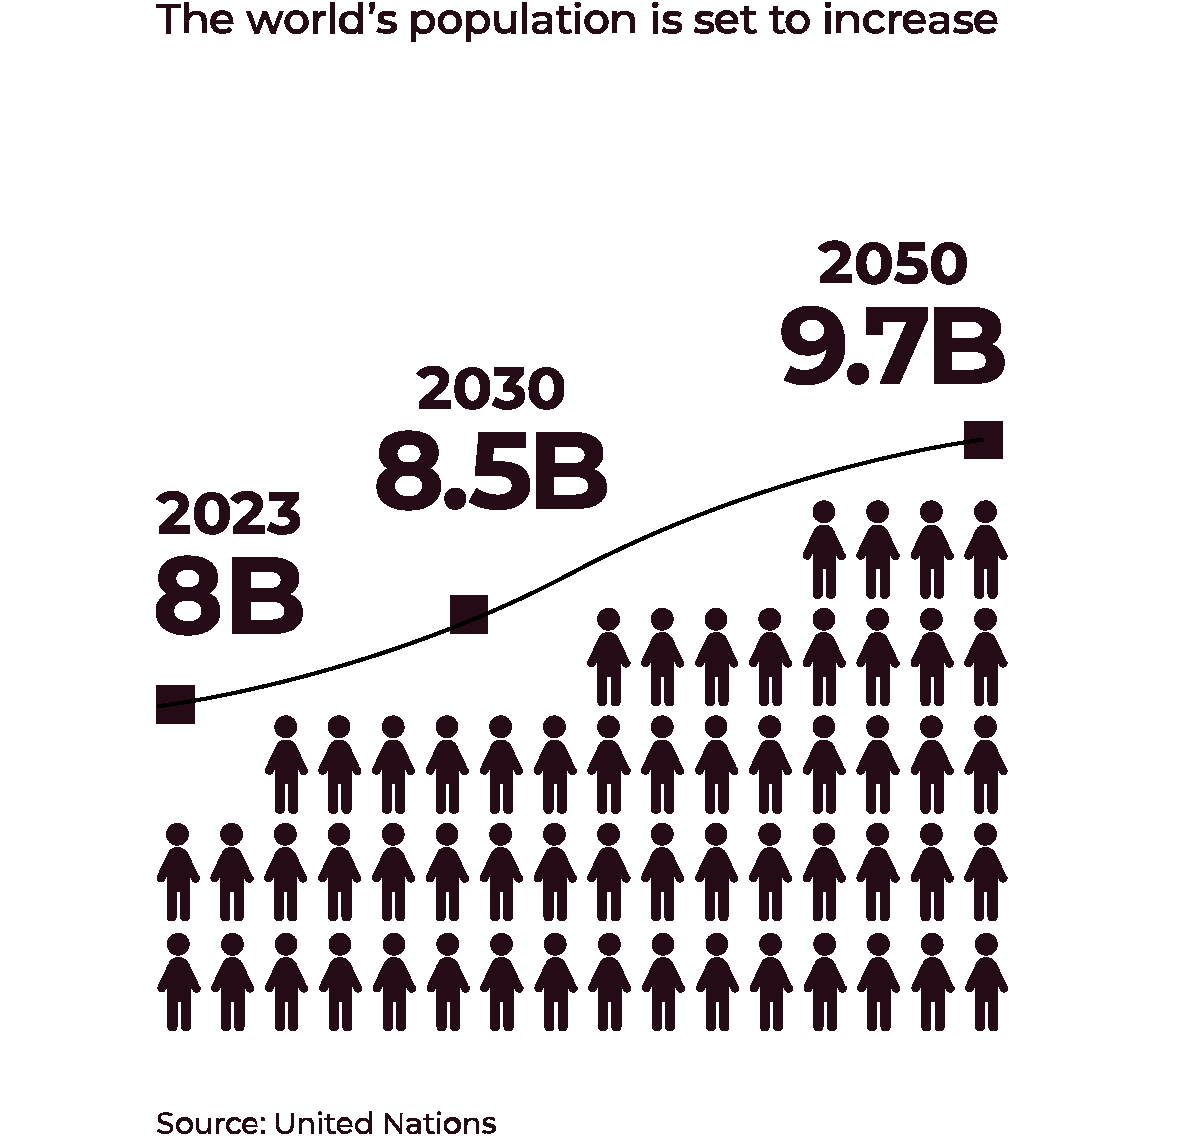 The world’s population is set to increase. 2023 8B, 2030 8.5B, 2050 9.7B